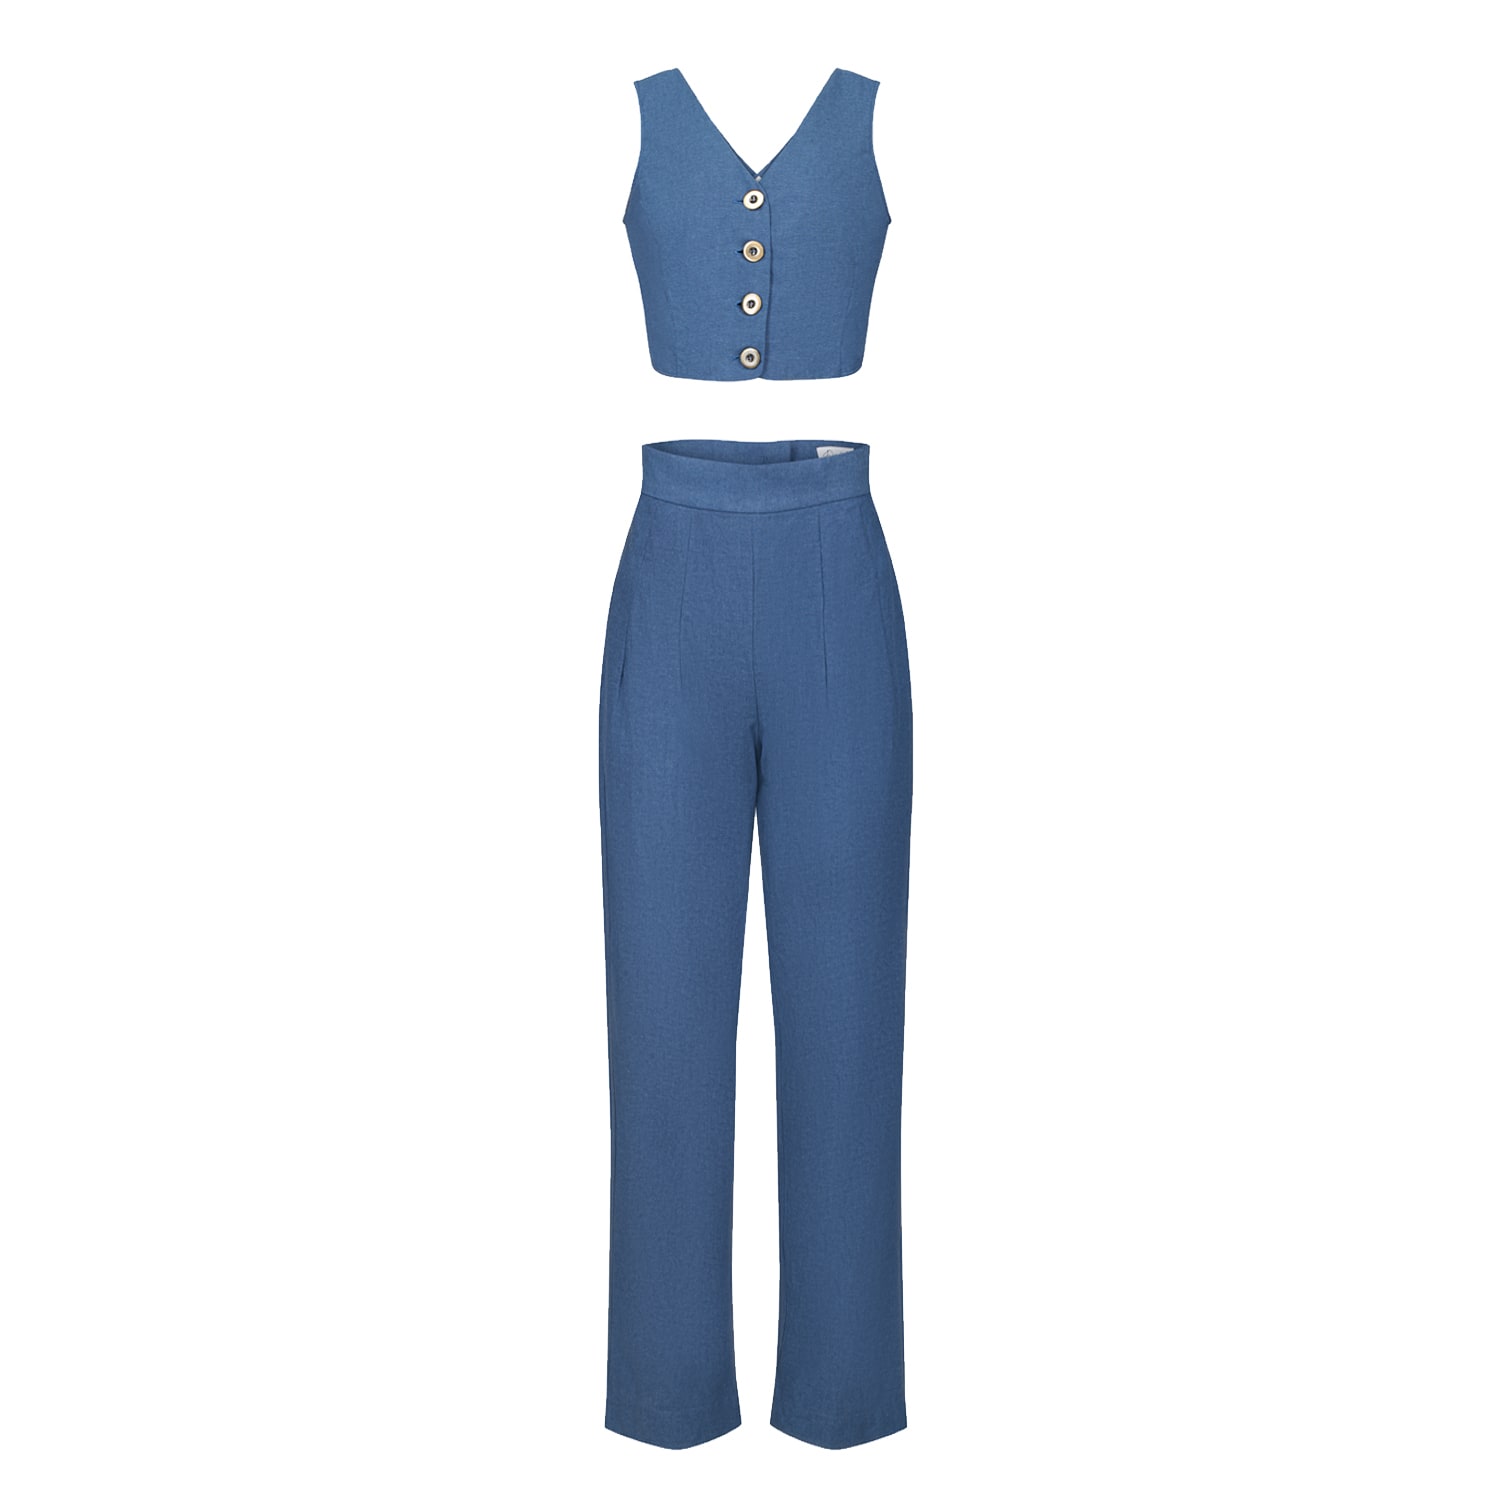 Shop Deer You Esme Enchanting Crop Top & Tailored Pant In Blue Chambray